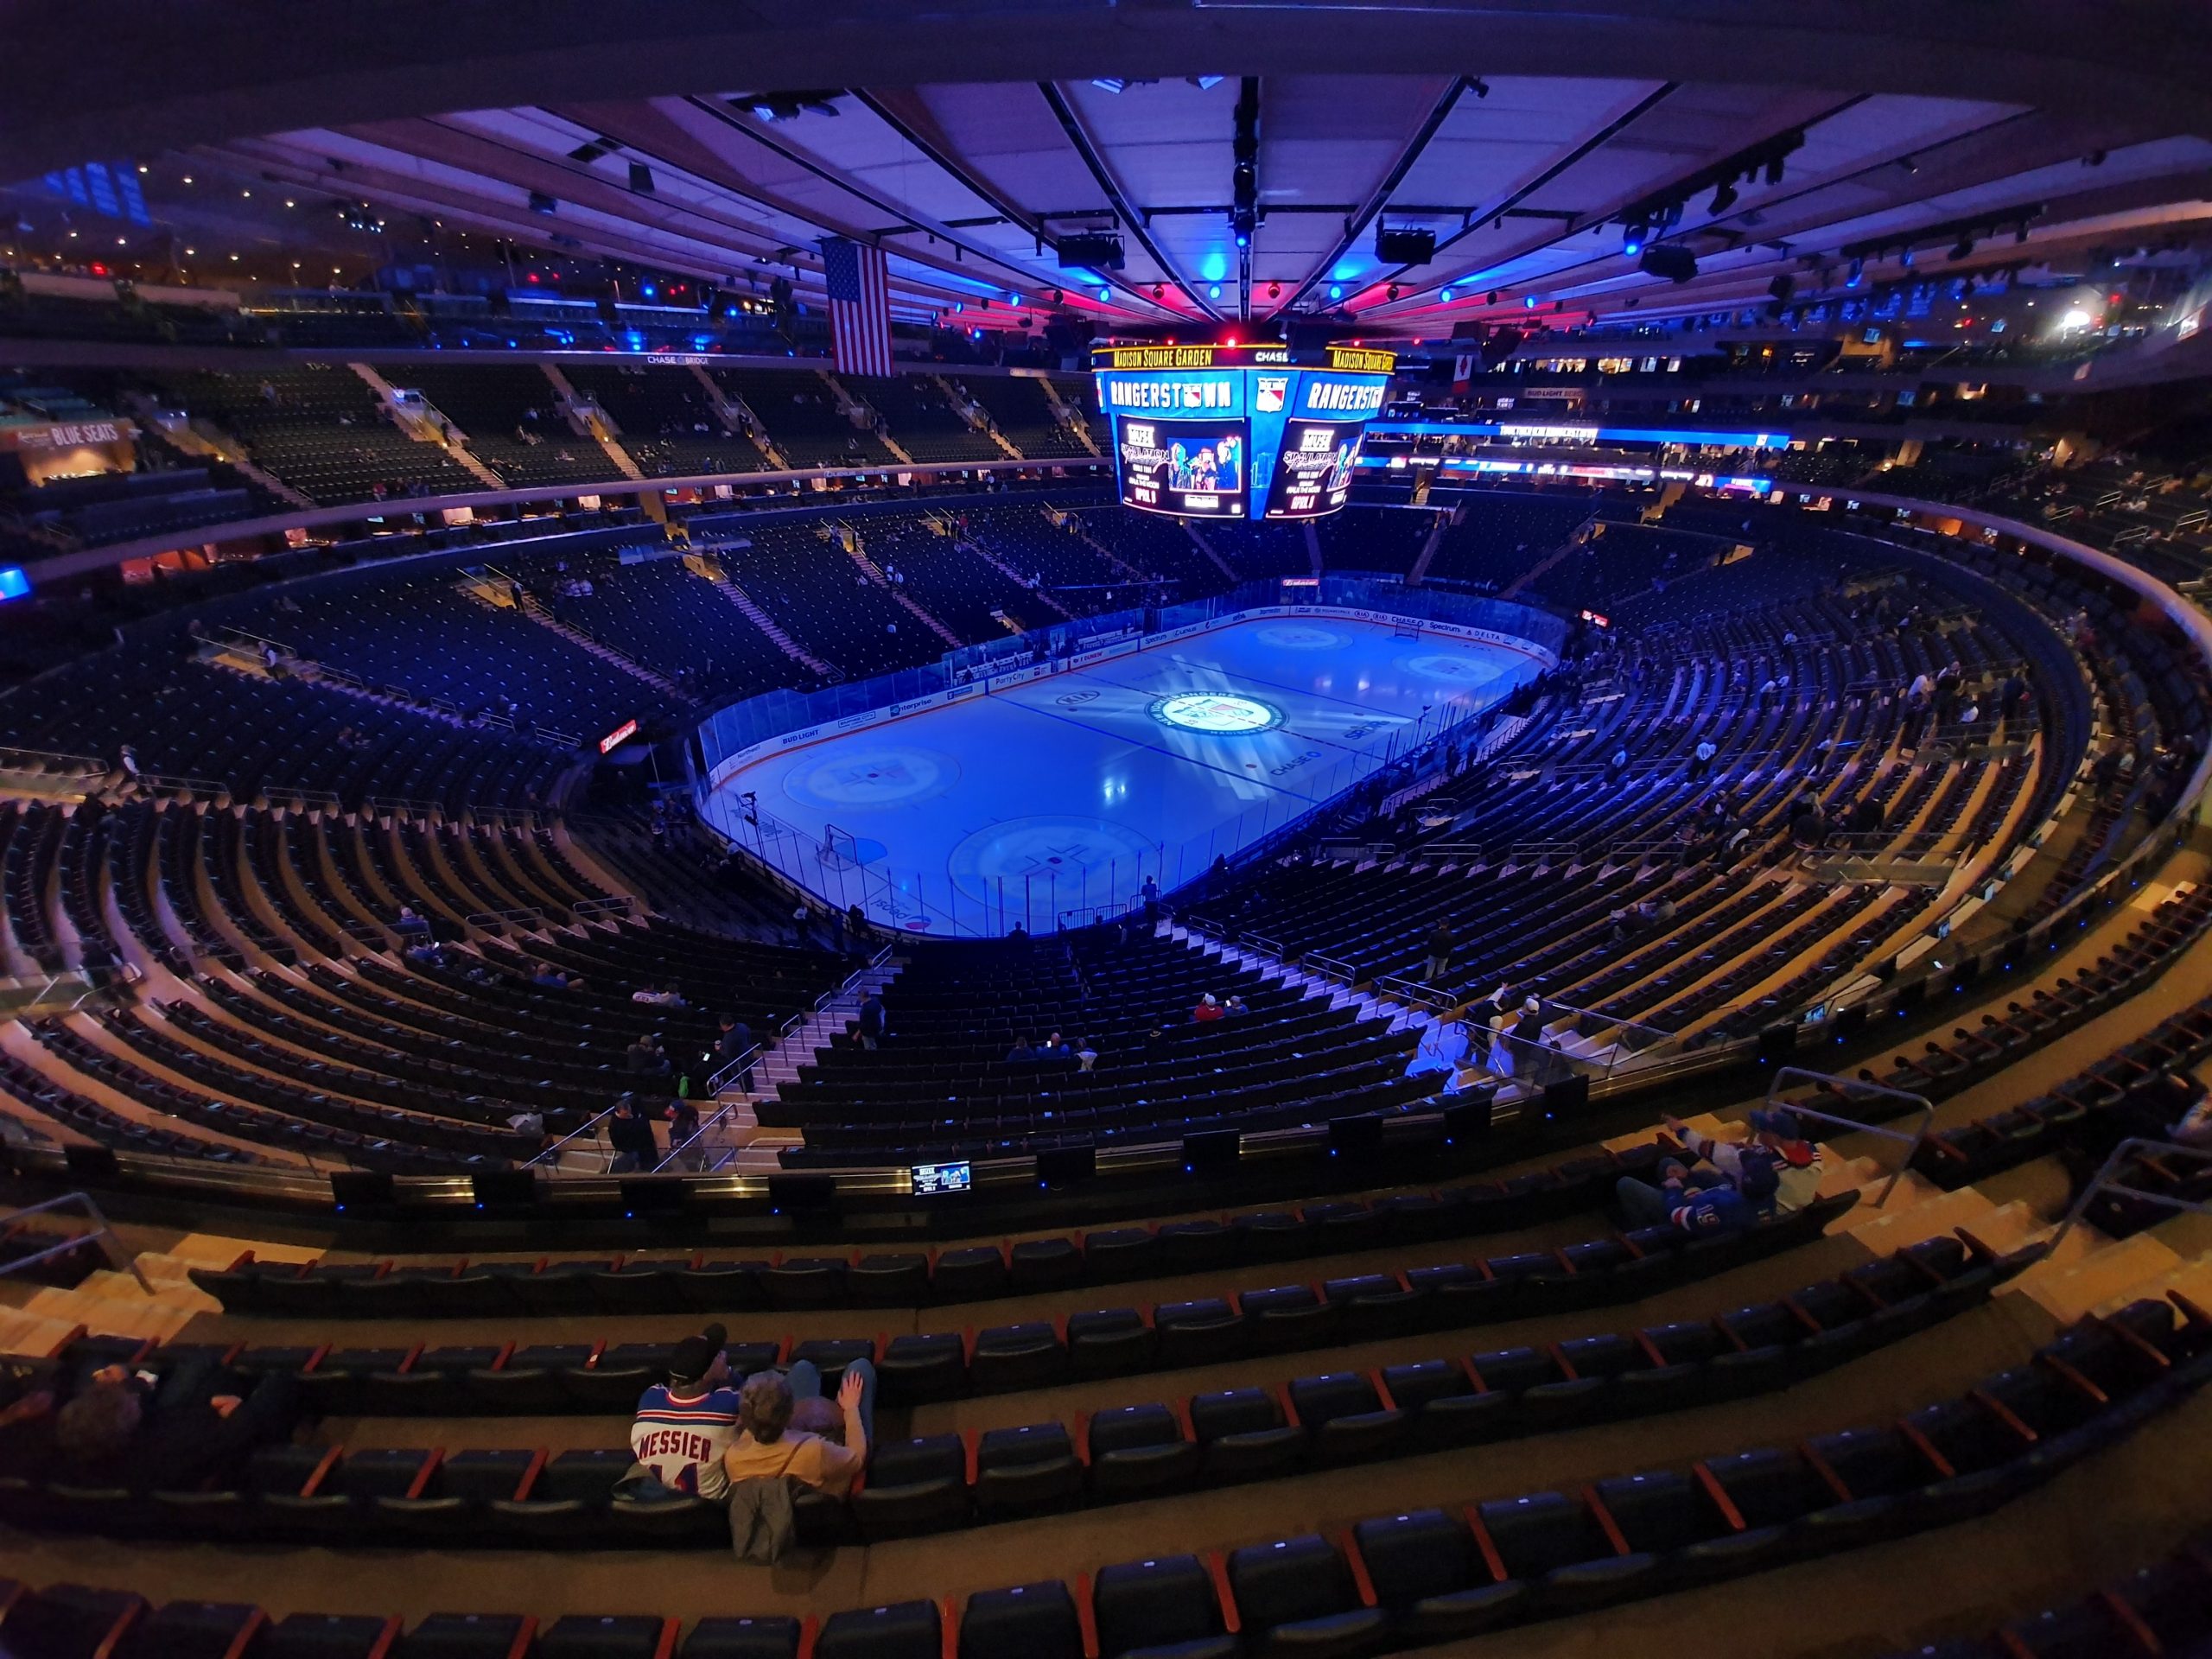 Tips for Seeing a Madison Square Garden Concert